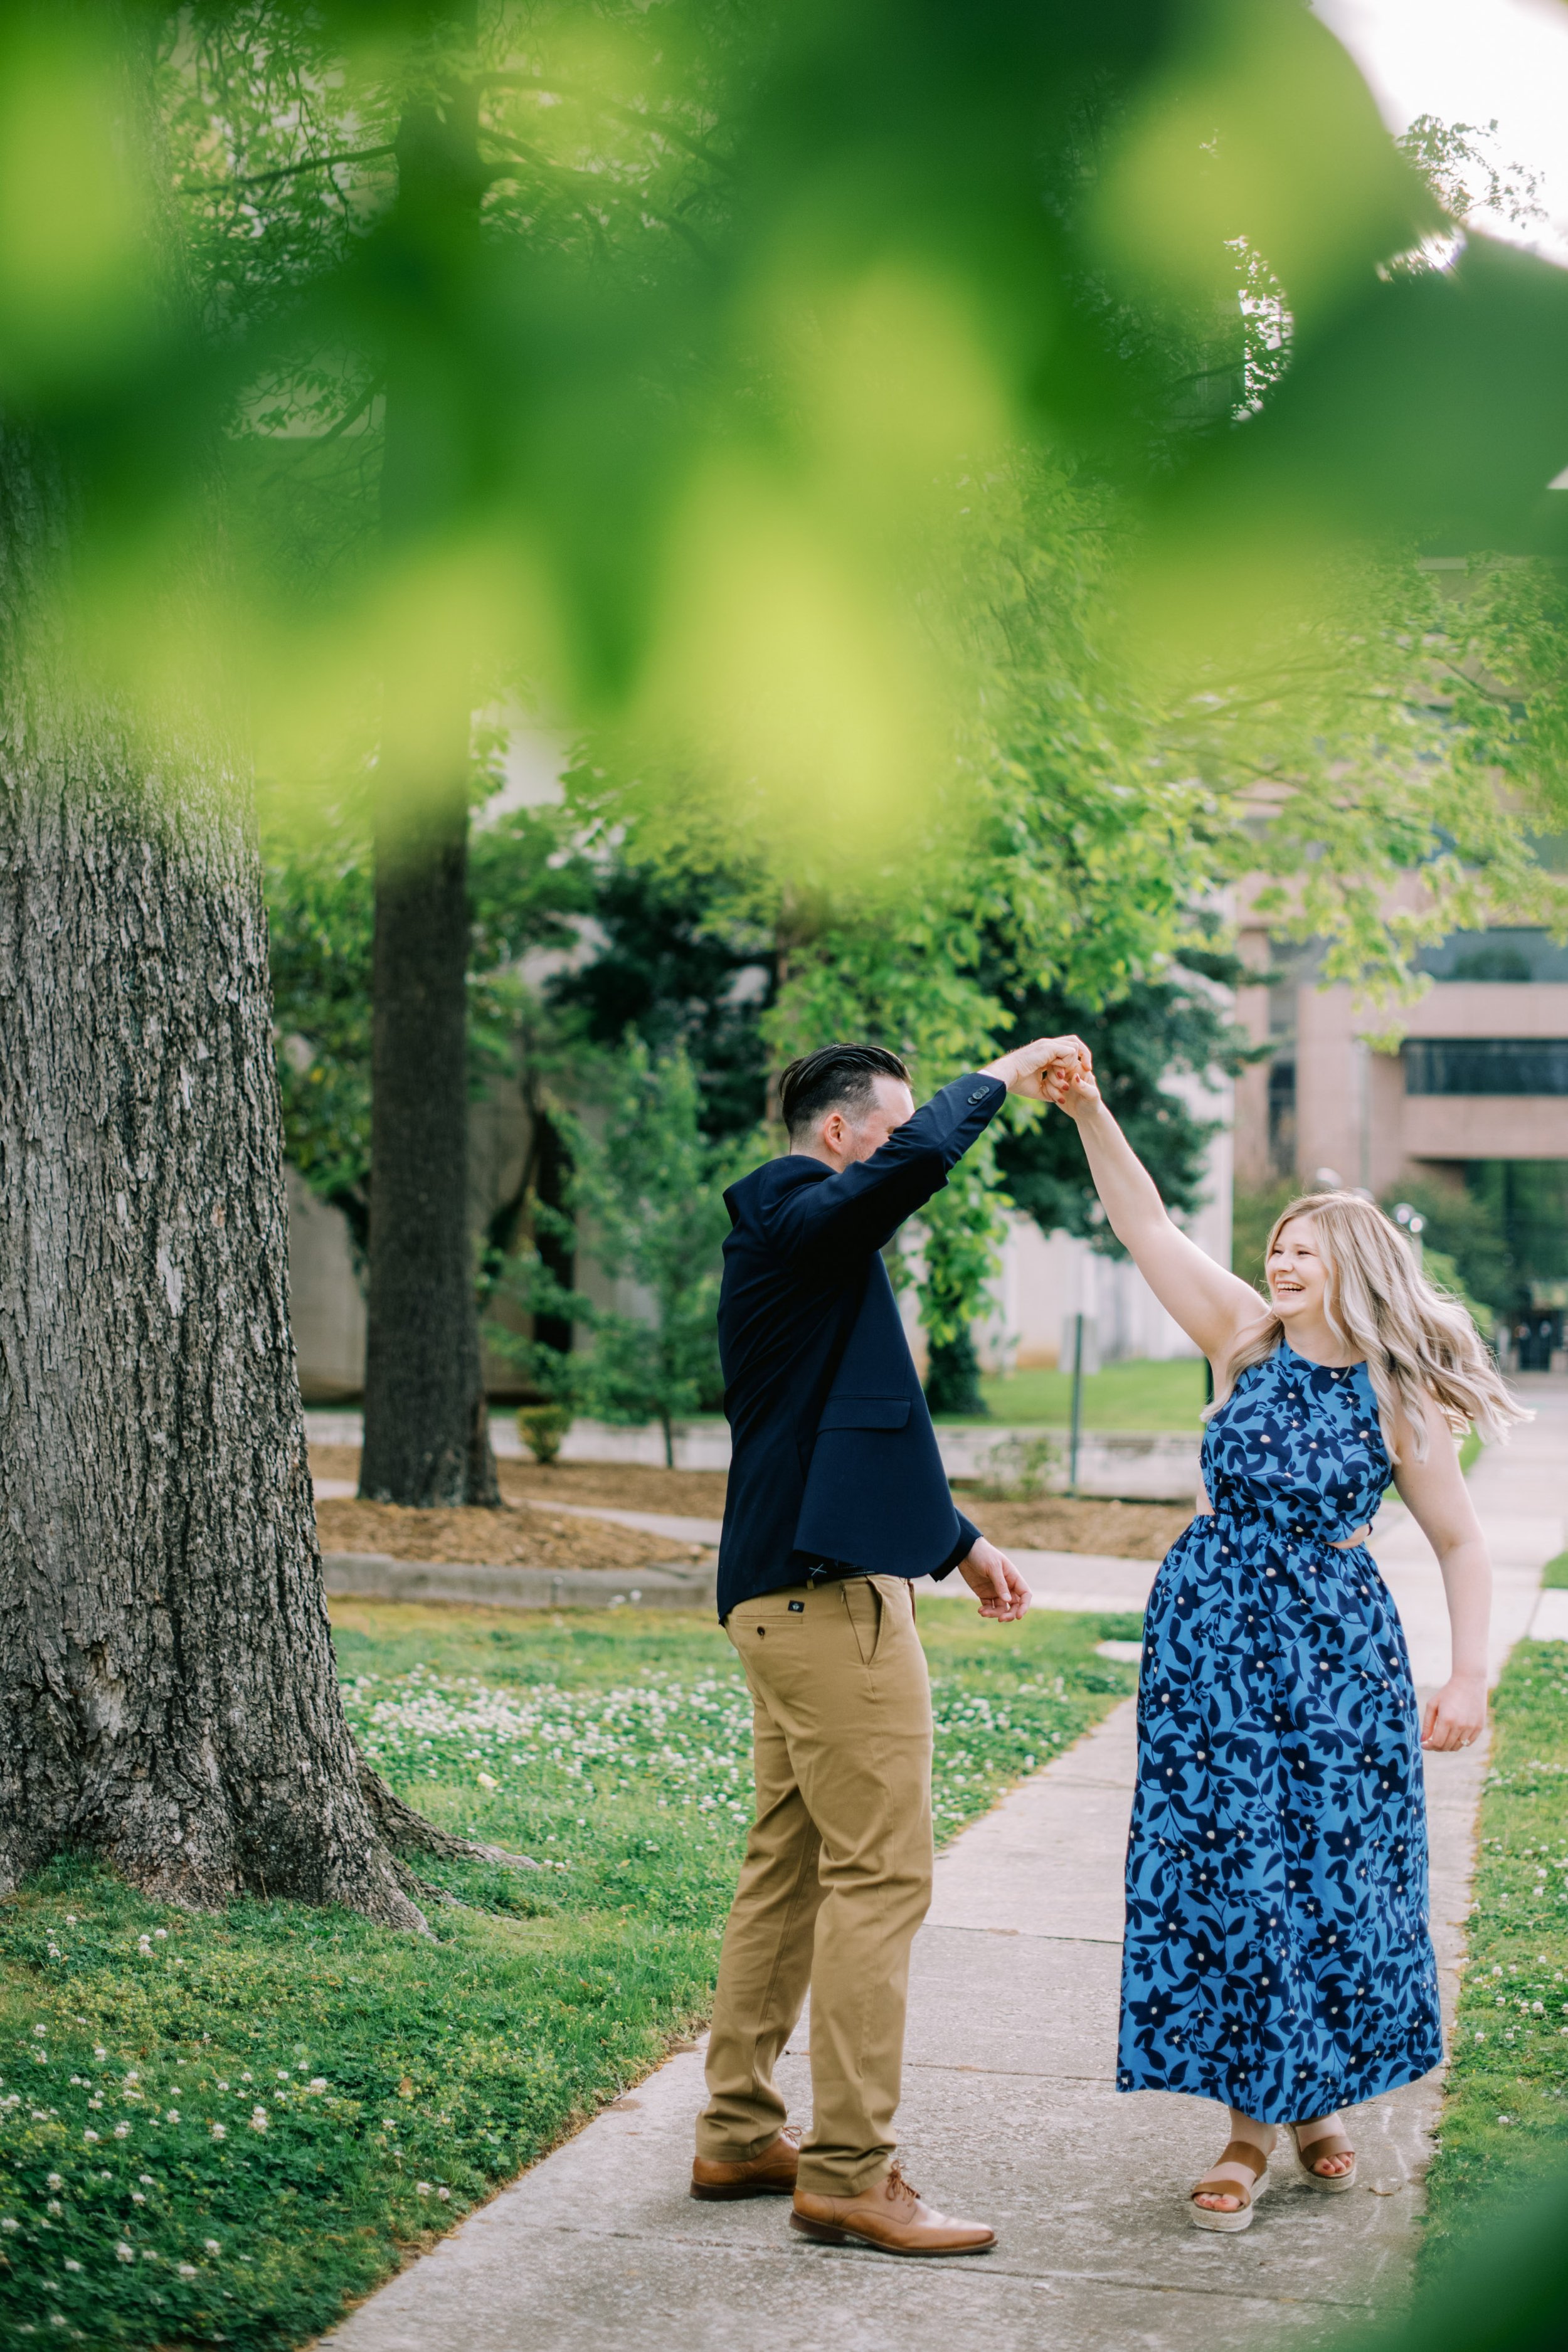 Victoria and Cody Sidewalk Dance Raleigh NC Engagement Photos in Historic Oakwood Neighborhood Fancy This Photography